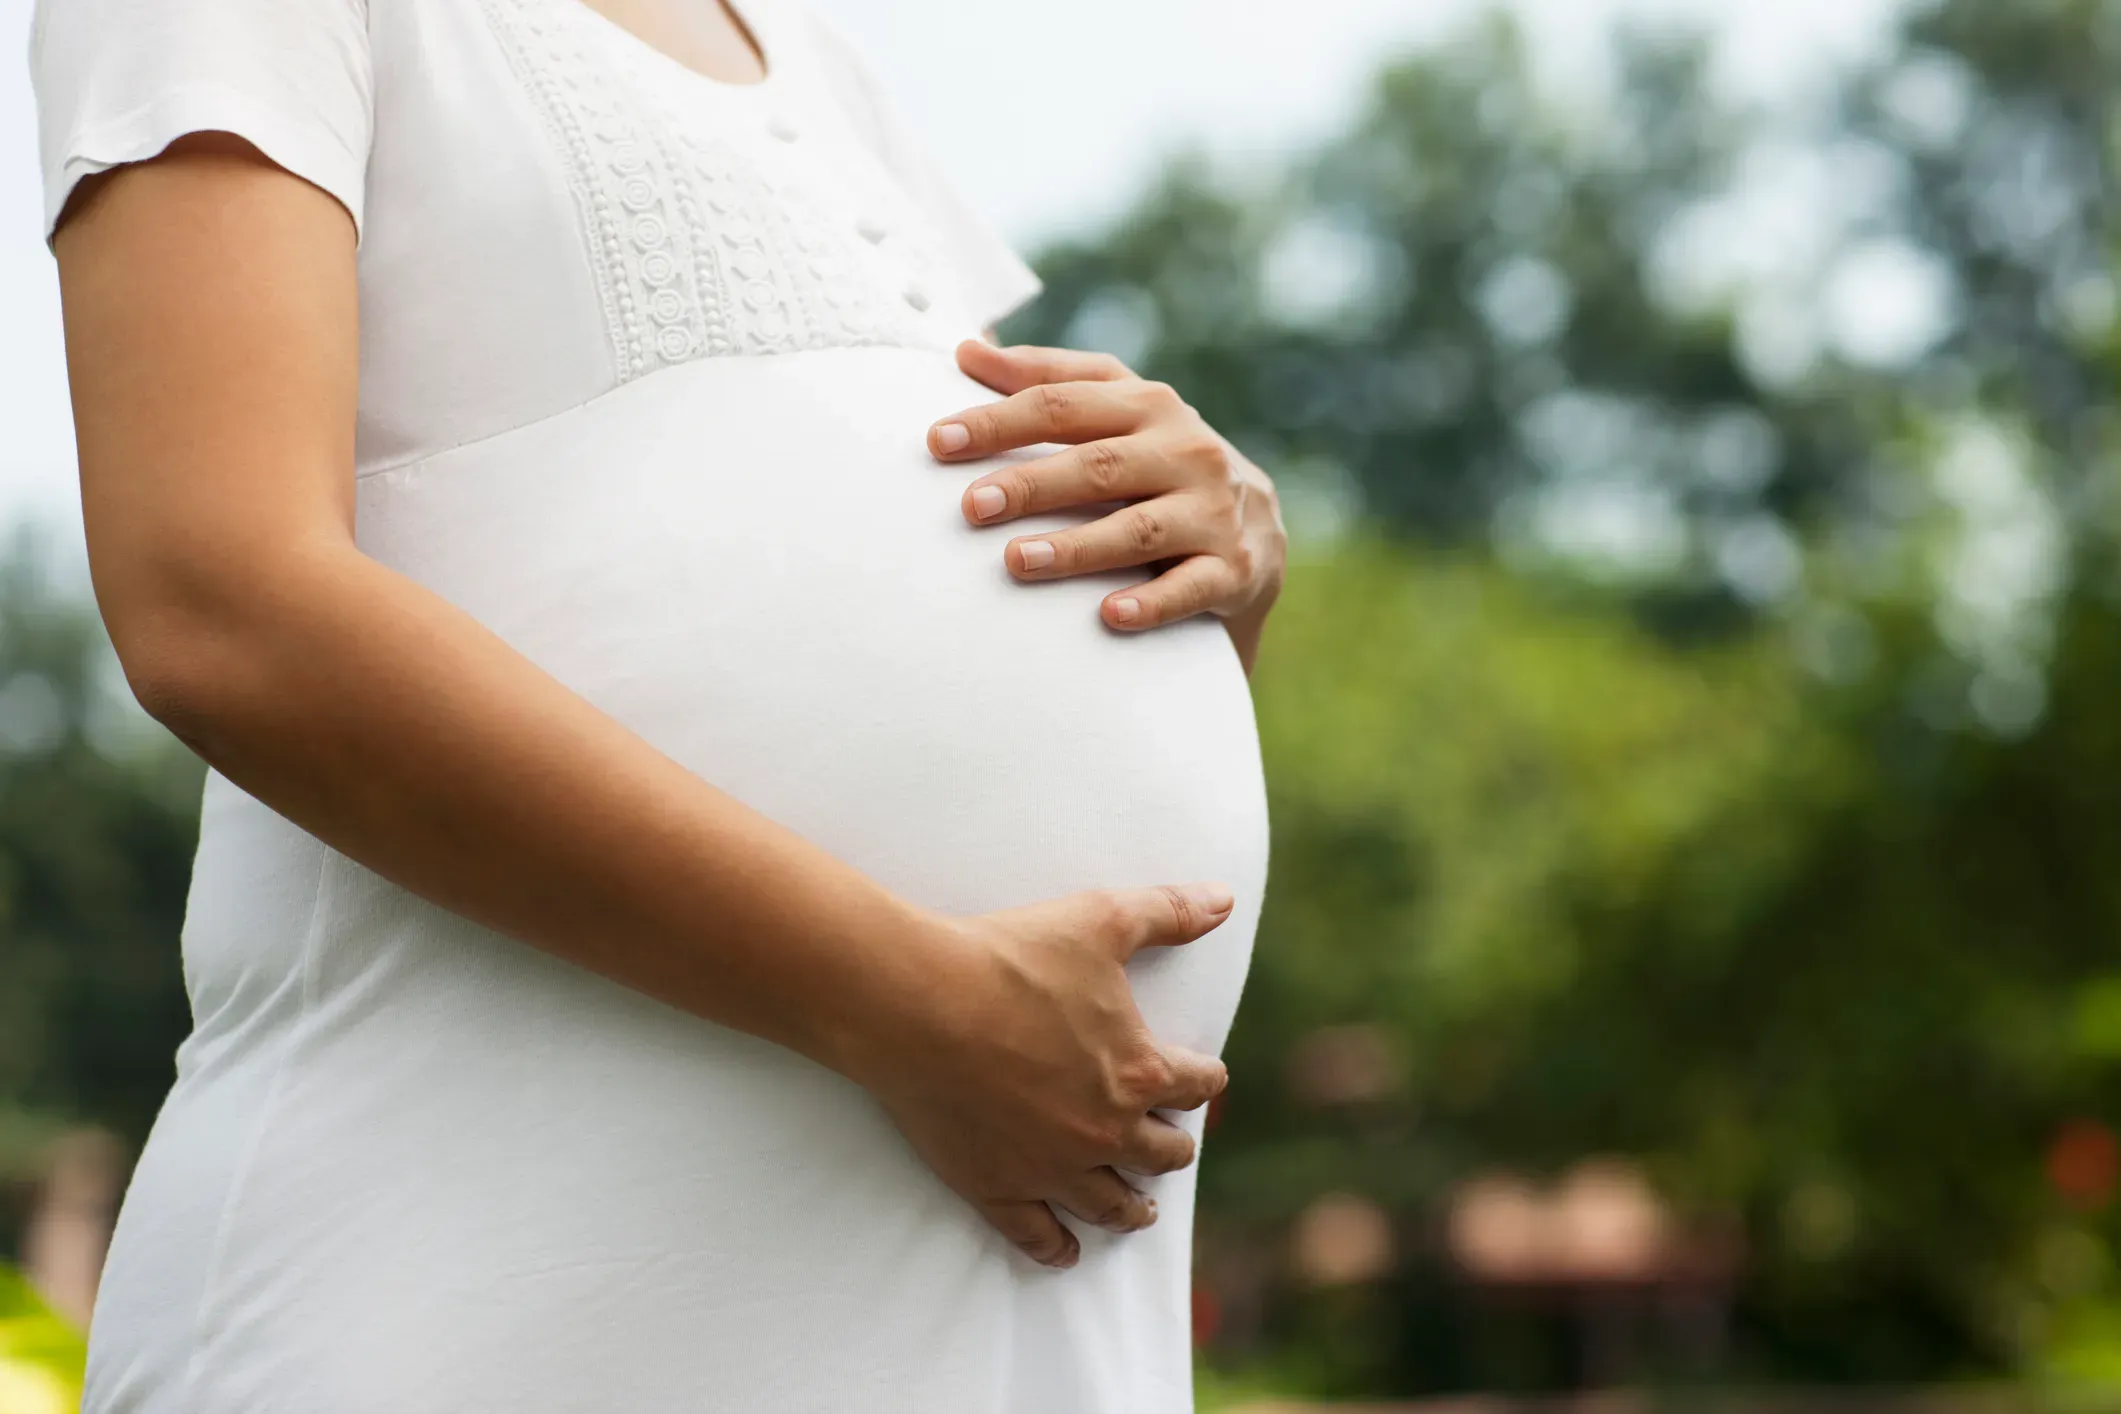 Pregnancy might accelerate natural maturing, concentrate on finds